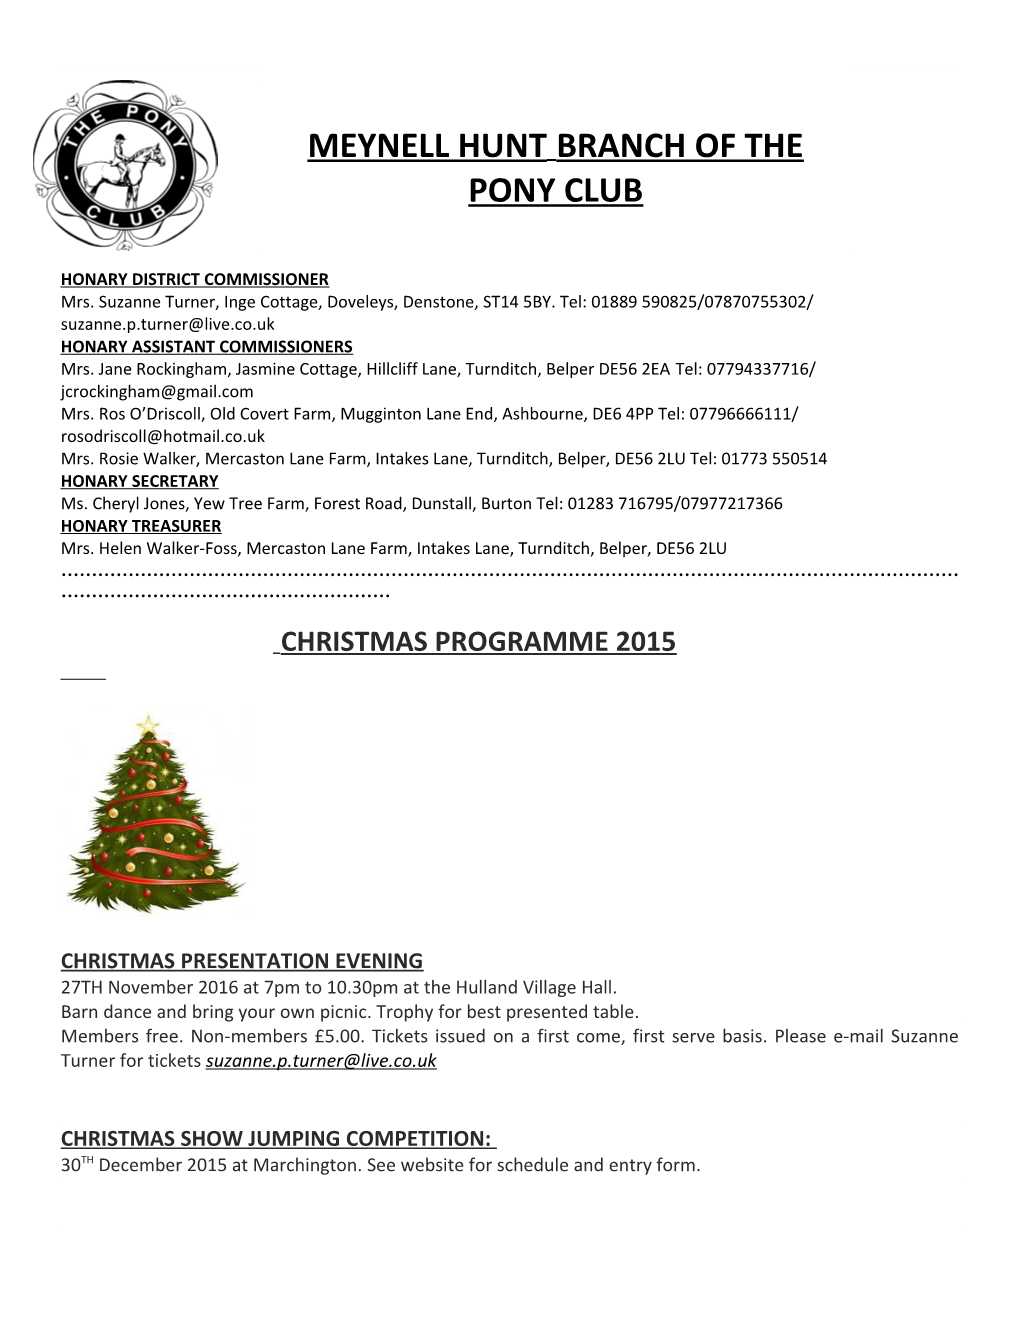 Meynell Hunt Branch of the Pony Club